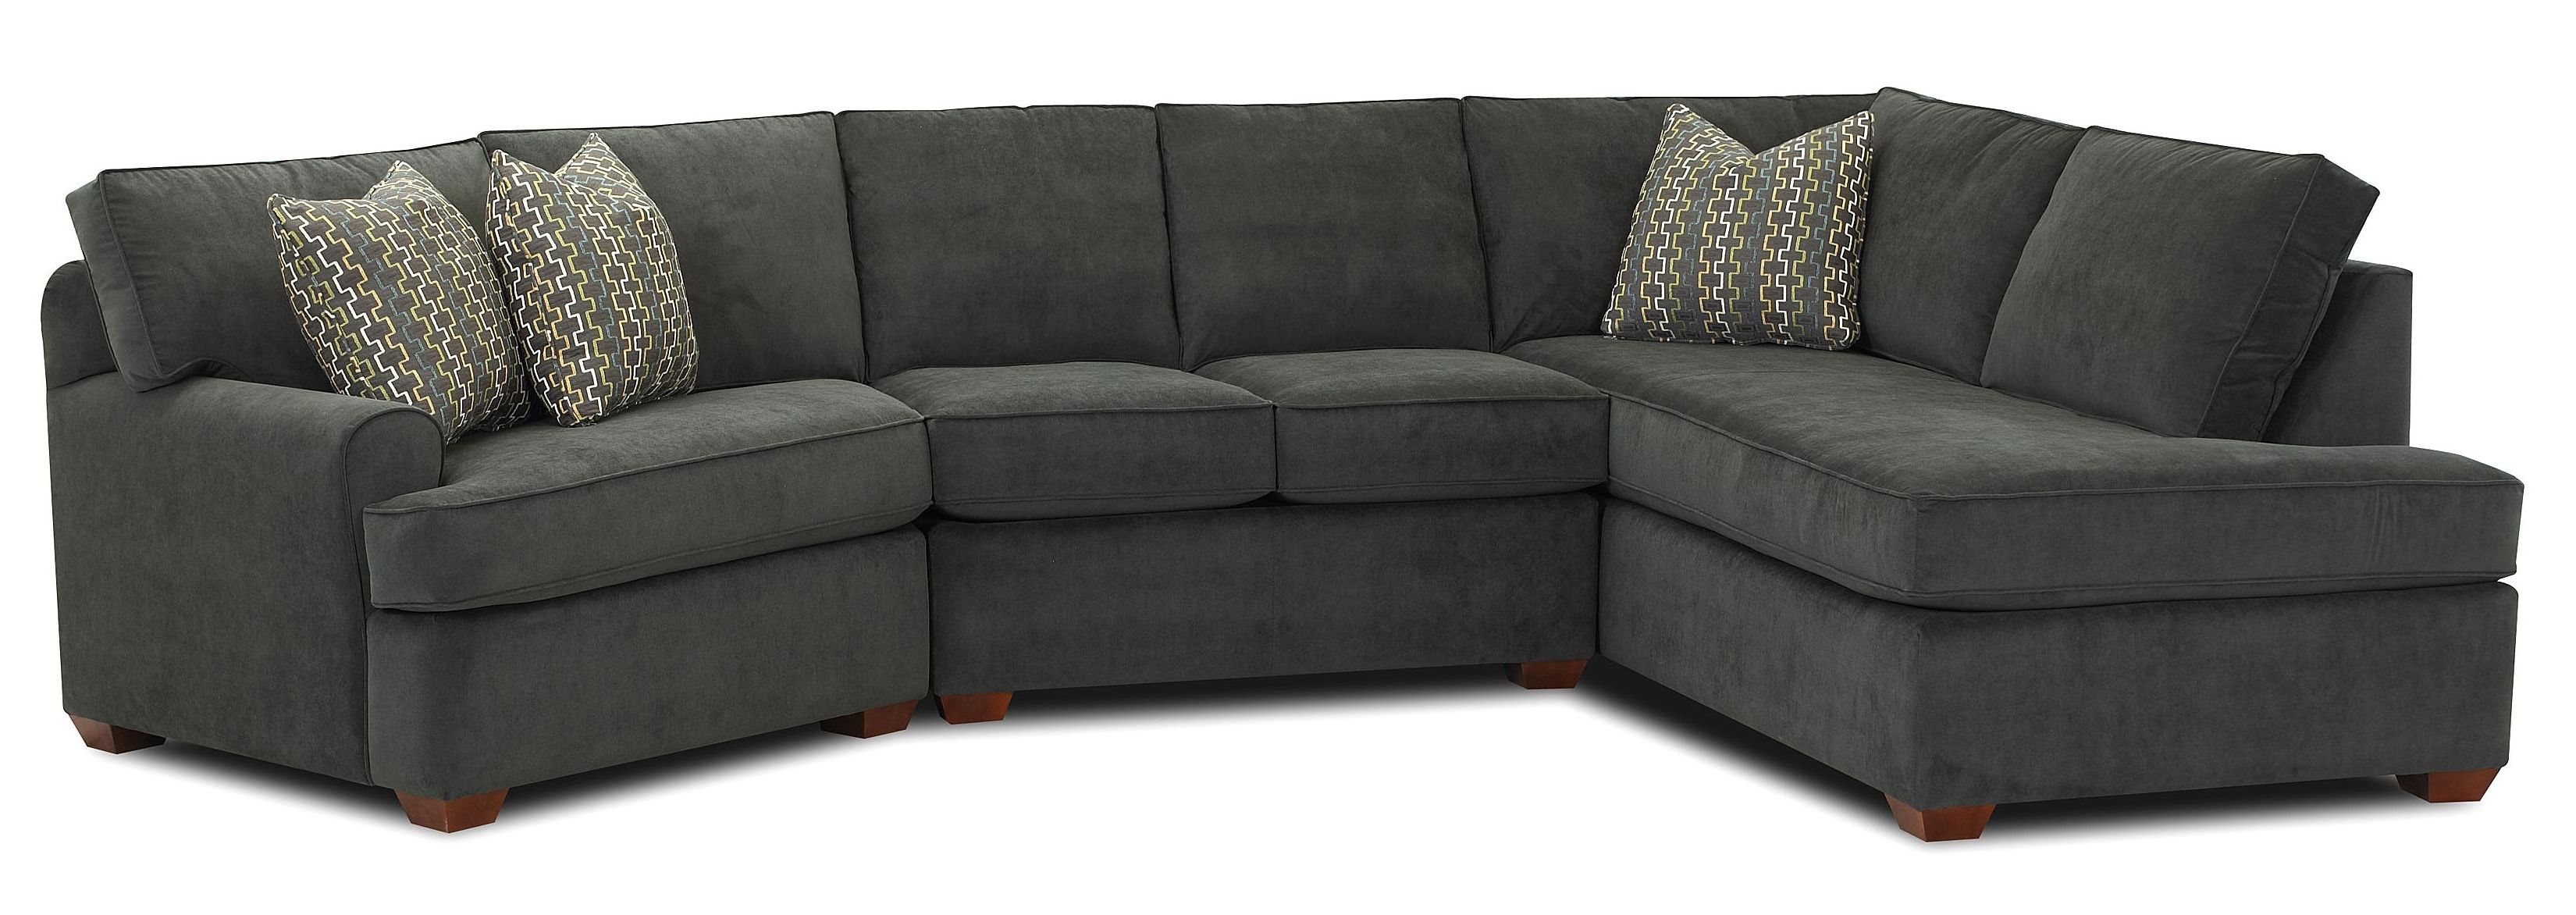 Well Known Chaise Sectional Sofas Intended For Klaussner Hybrid Sectional Sofa With Left Facing Sofa Chaise (View 4 of 15)